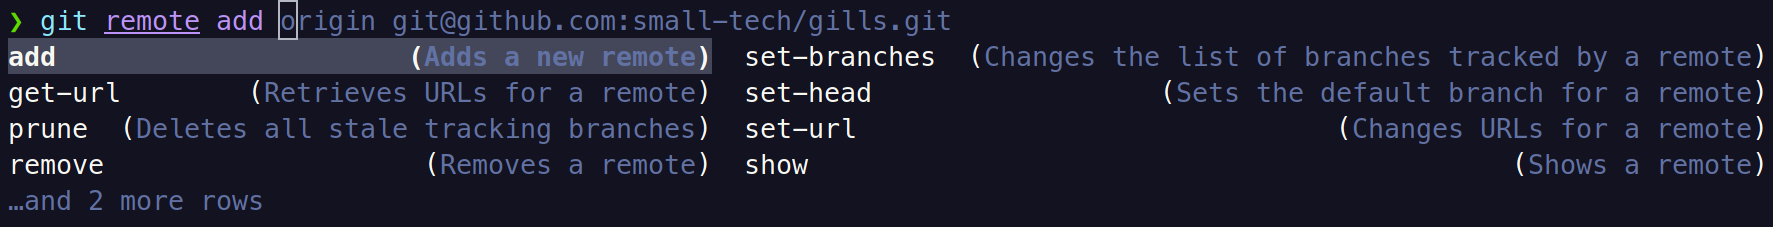 Screenshot of auto-suggest for 'git remote' + tab, with the add subcommand suggestion selected. From the history, the prompt is suggesting completion to 'origin git@github.com:small-tech/gills.git' and, underneath, it shows a list of other subcommand suggestions along with their descriptions: add (Adds a new remote), set-branches (Changes the list of branches tracked by a remote), get-url (Retrieves URLs for a remote), set-head (Sets the default branch for a remote), prune (Deletes all stale tracking branches), set-url (Changes URLs for a remote), remove (Removes a remote), show (Shows a remote) …and 2 more rows